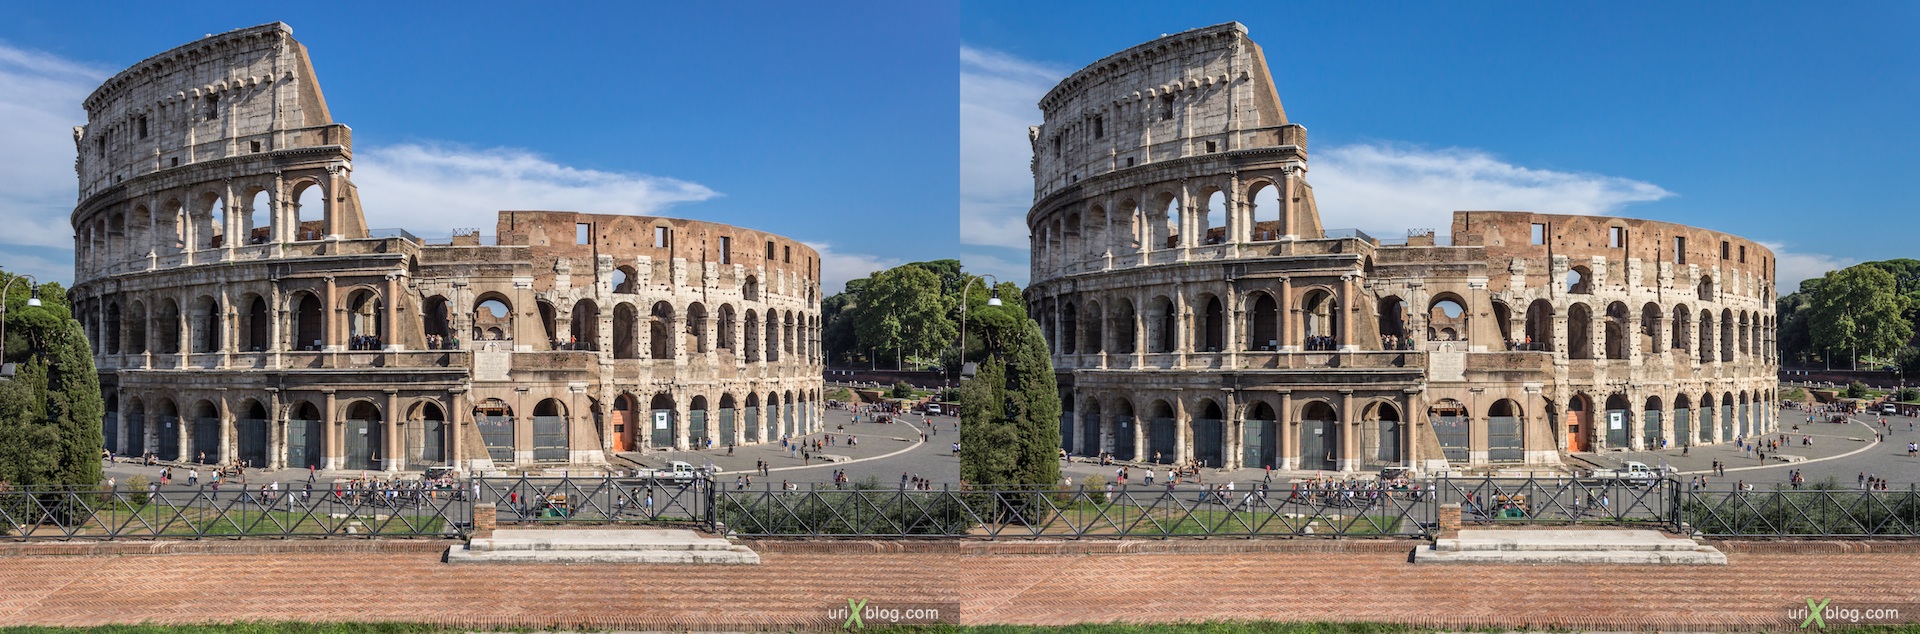 2012, Colosseum, Coliseum, Flavian Amphitheatre, Rome, Italy, 3D, stereo pair, cross-eyed, crossview, cross view stereo pair